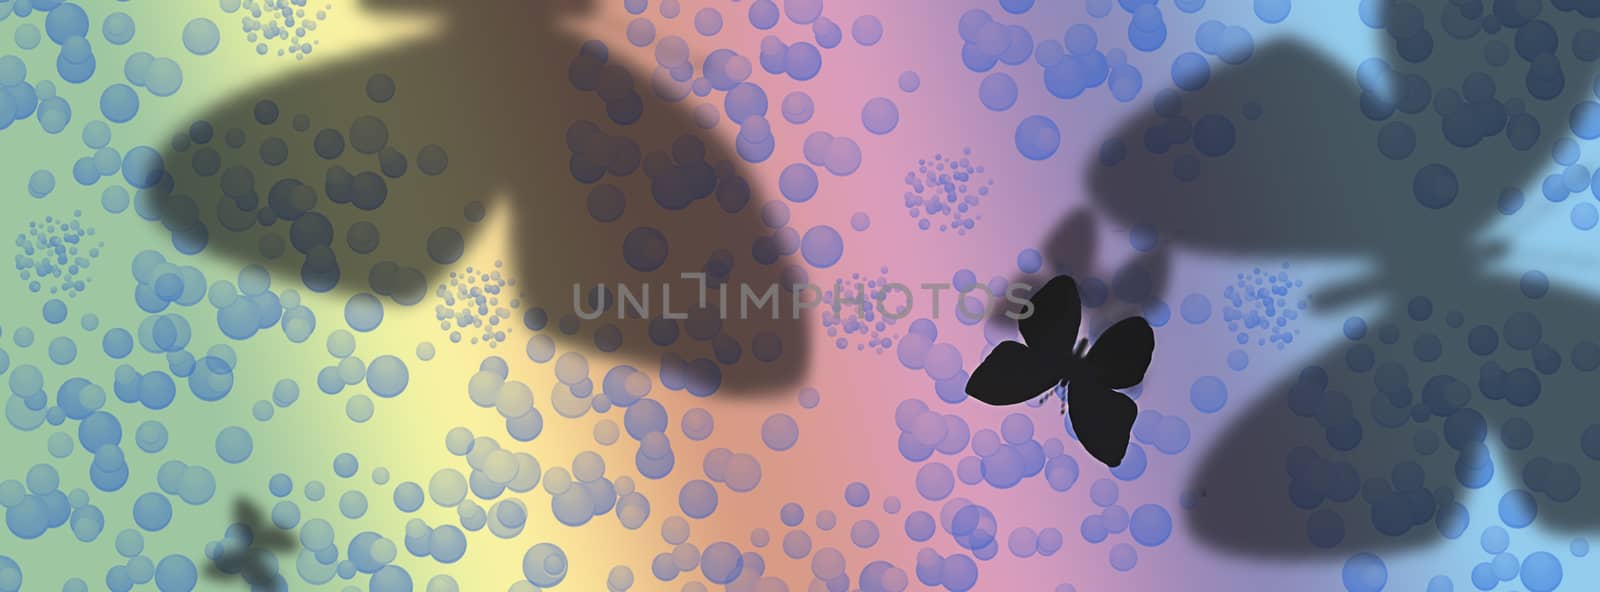 Panorama banner illustration of abstract rainbow background with circle bubbles and butterfly shadows